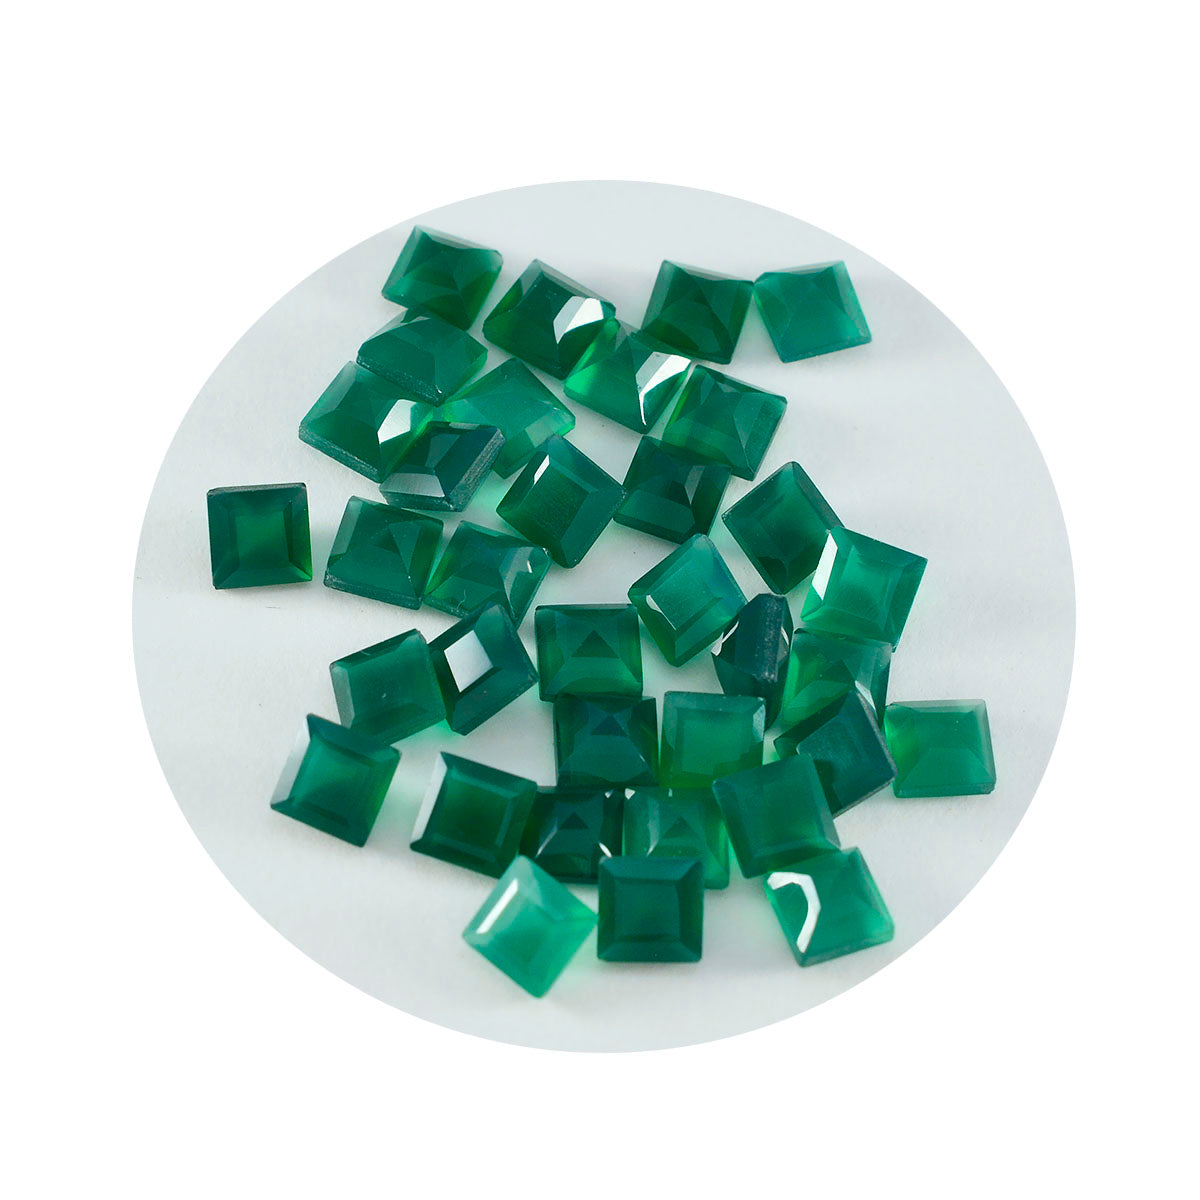 Riyogems 1PC Real Green Onyx Faceted 5X5 mm Square Shape good-looking Quality Loose Gemstone